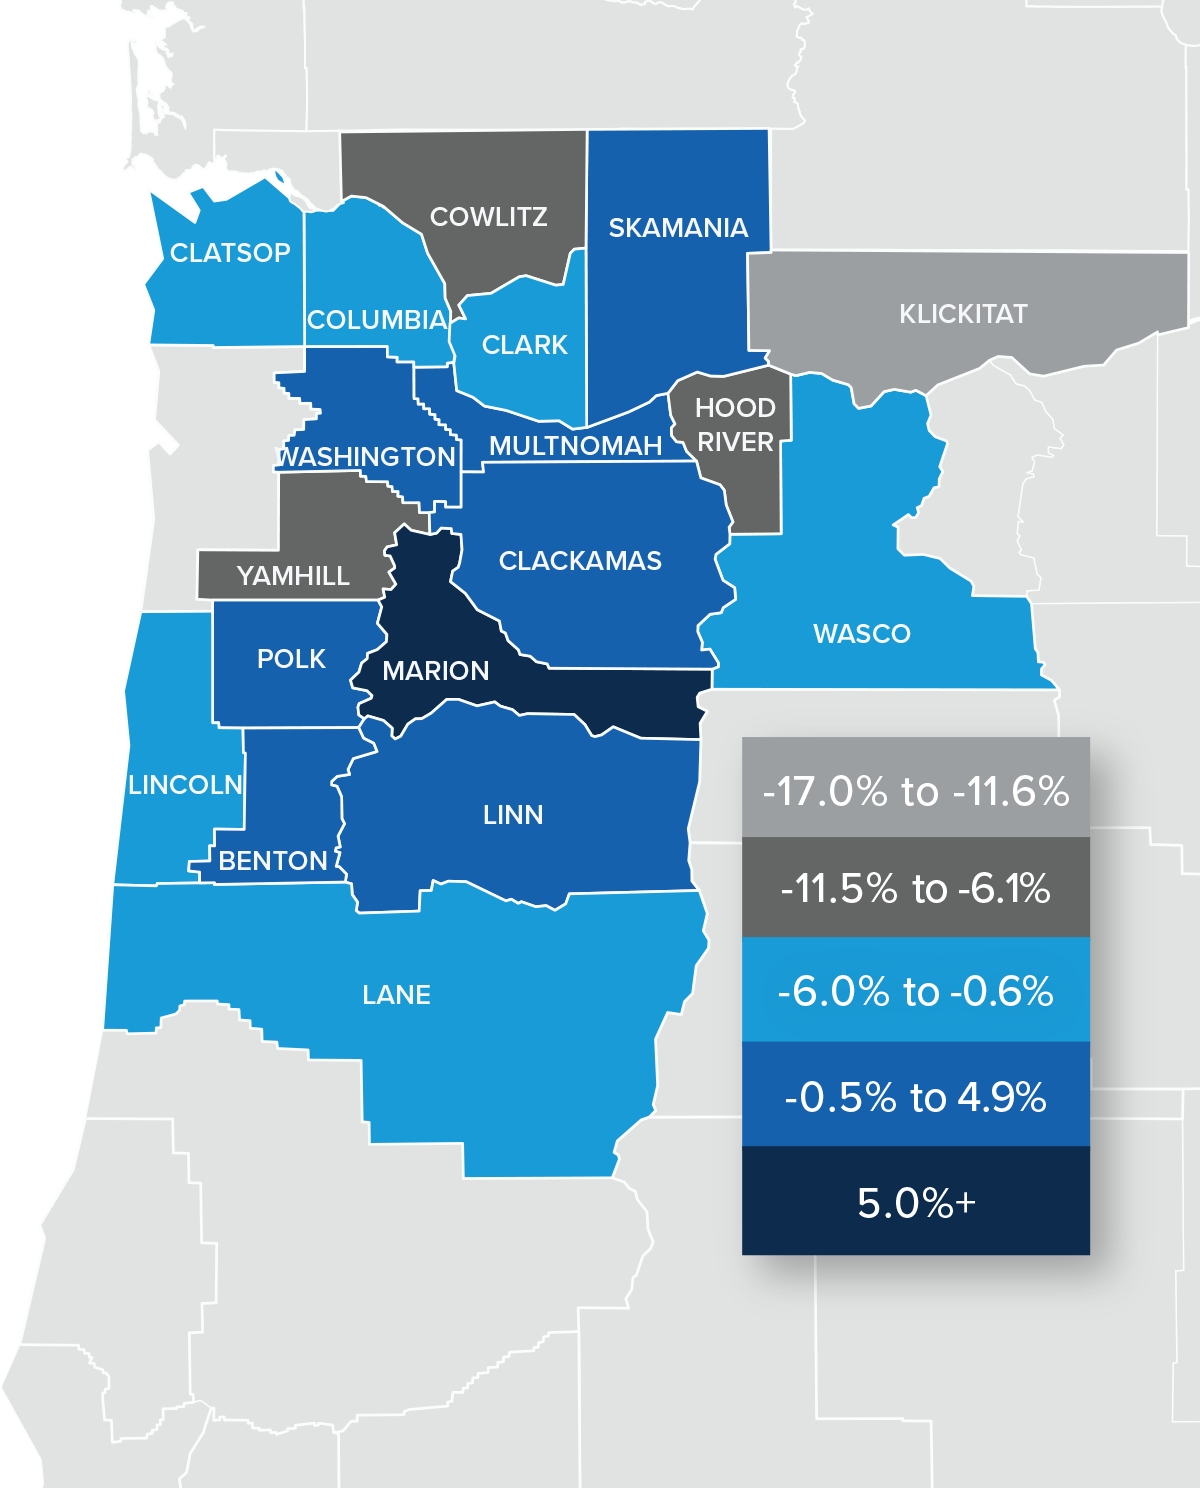 A map showing the real estate home prices percentage changes for various counties in Northwest Oregon and Southwest Washington. Different colors correspond to different tiers of percentage change. Klickitat County has a percentage change in the -17% to -11.6%+ range, Cowlitz, Hood River, and Yamhill counties are in the -11.5% to -6.1% change range, Clatsop, Columbia, Clark, Wasco, Lincoln, and Lane are in the -6% to -0.6% change range, Skamania, Washington, Multnomah, Clackamas, Polk, Benton, and Linn counties are in the -0.5% to 4.9% change range, and Marion County is in the 5%+ change range.